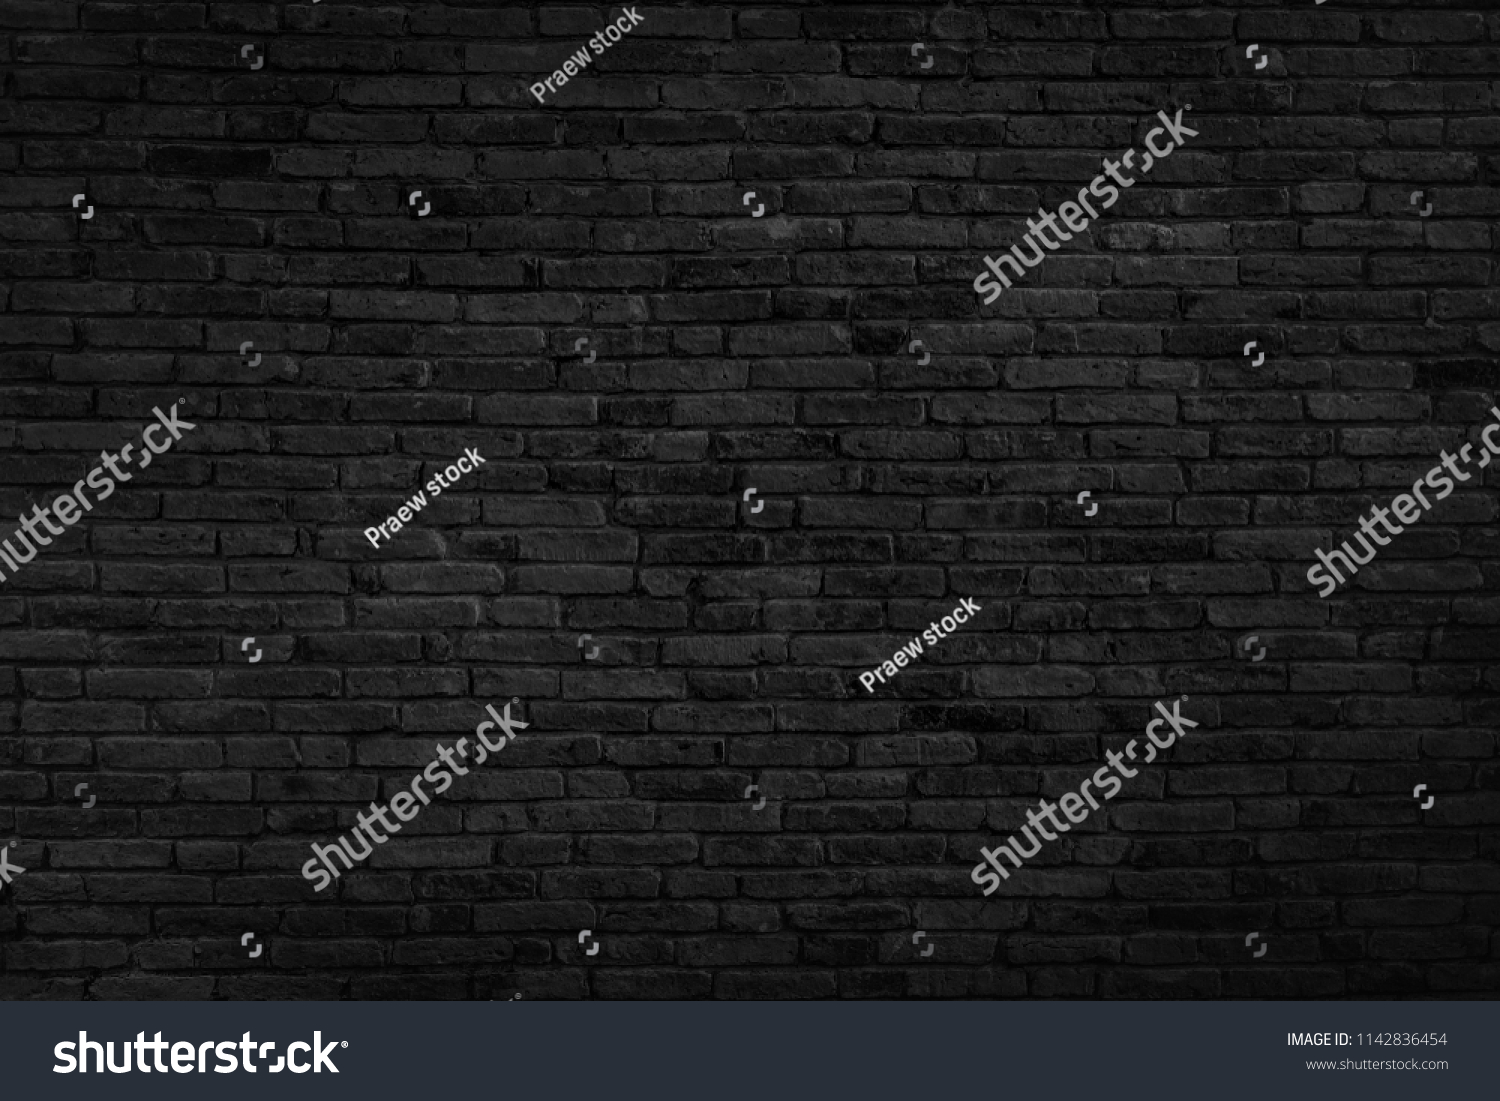 Old black brick wall texture background,brick wall texture for for interior or exterior design backdrop,vintage dark tone. #1142836454